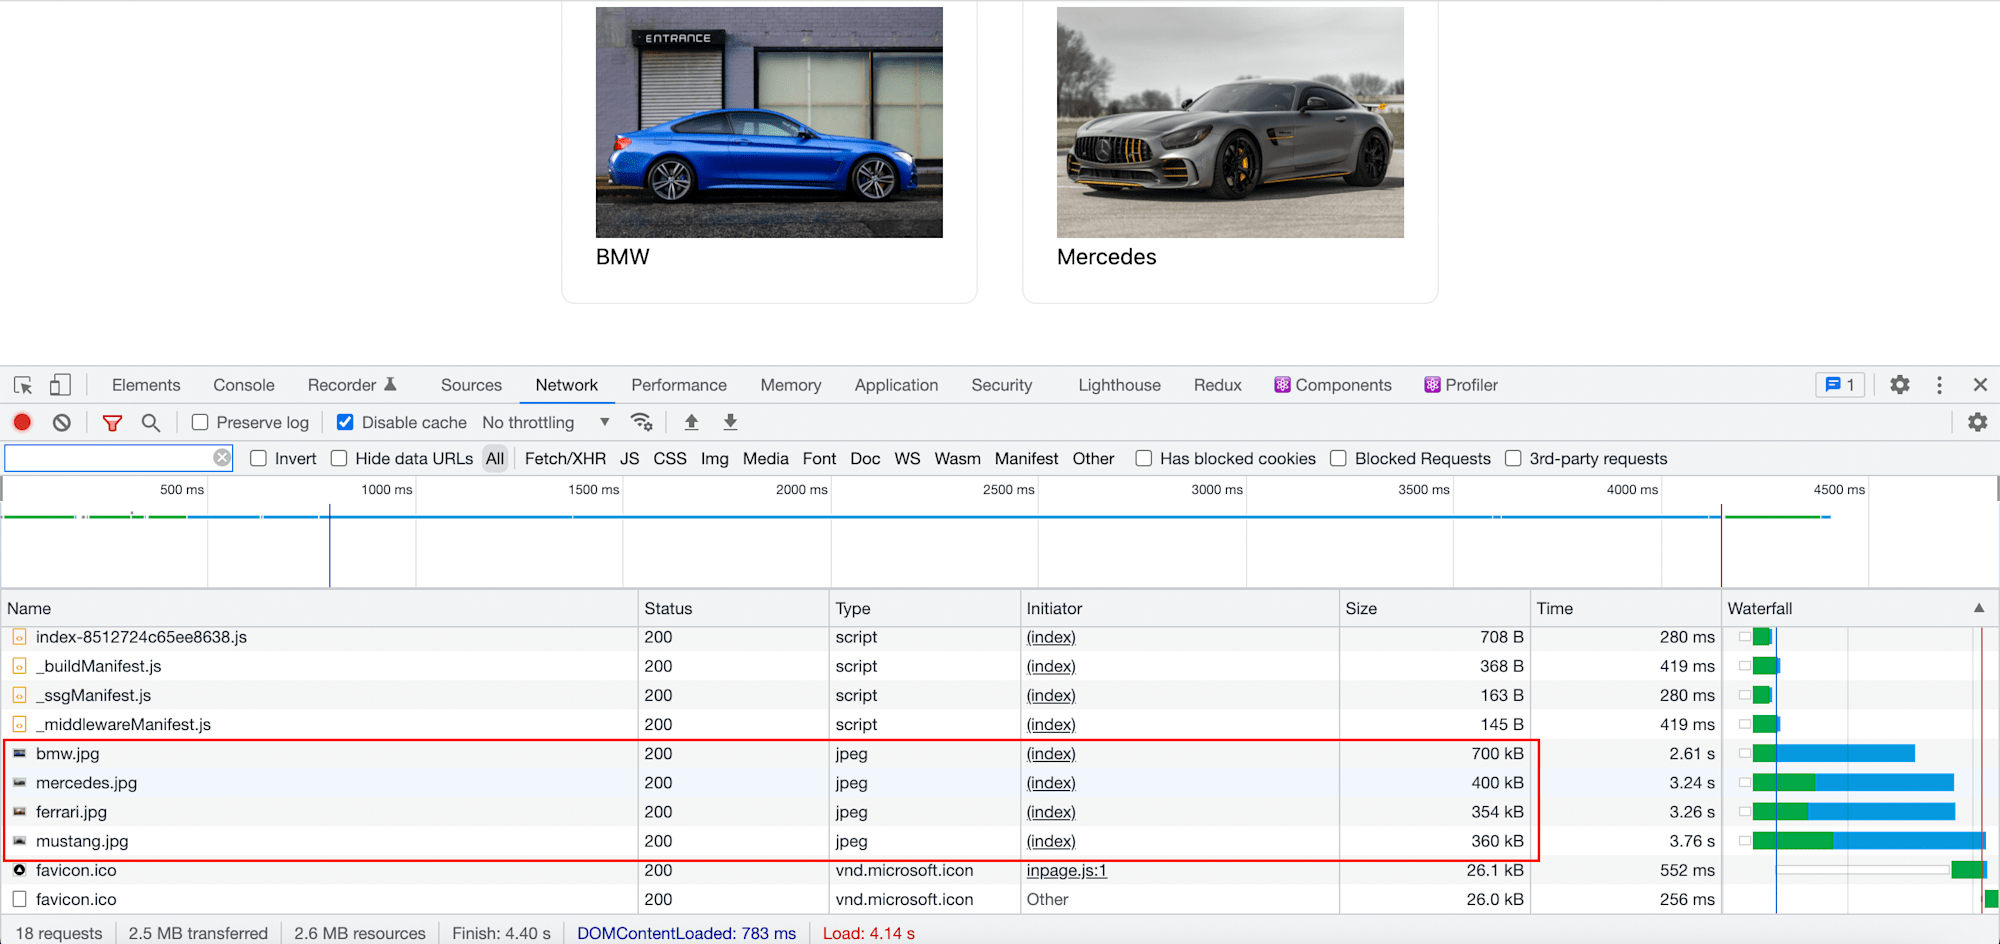 Images and size highlighted